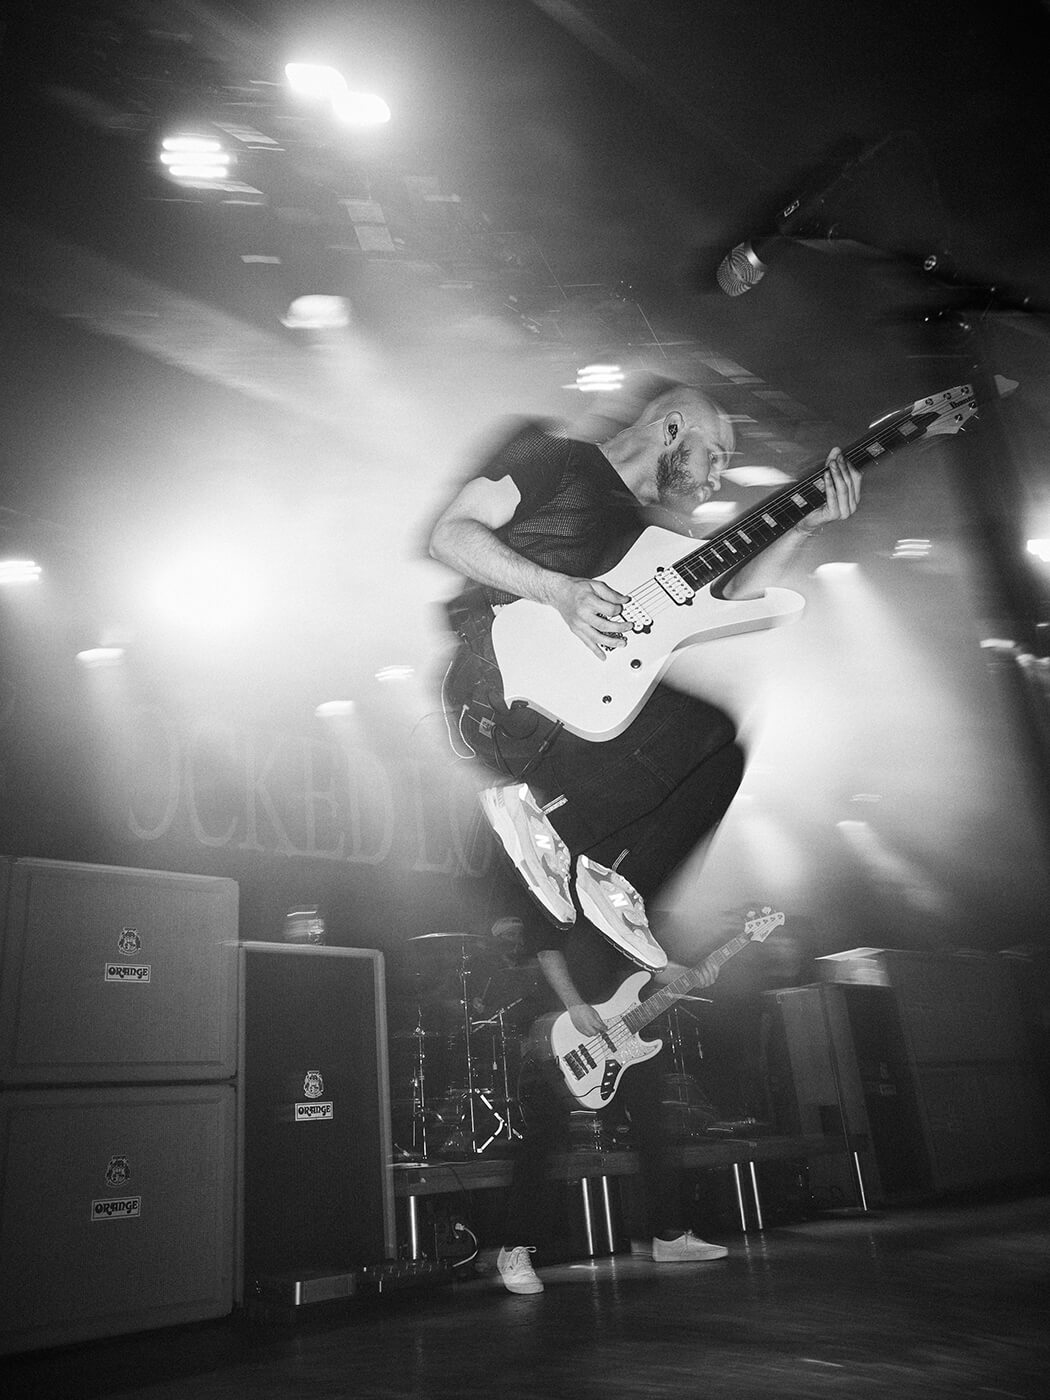 Isaac Hale of Knocked Loose does a jump onstage while performing live